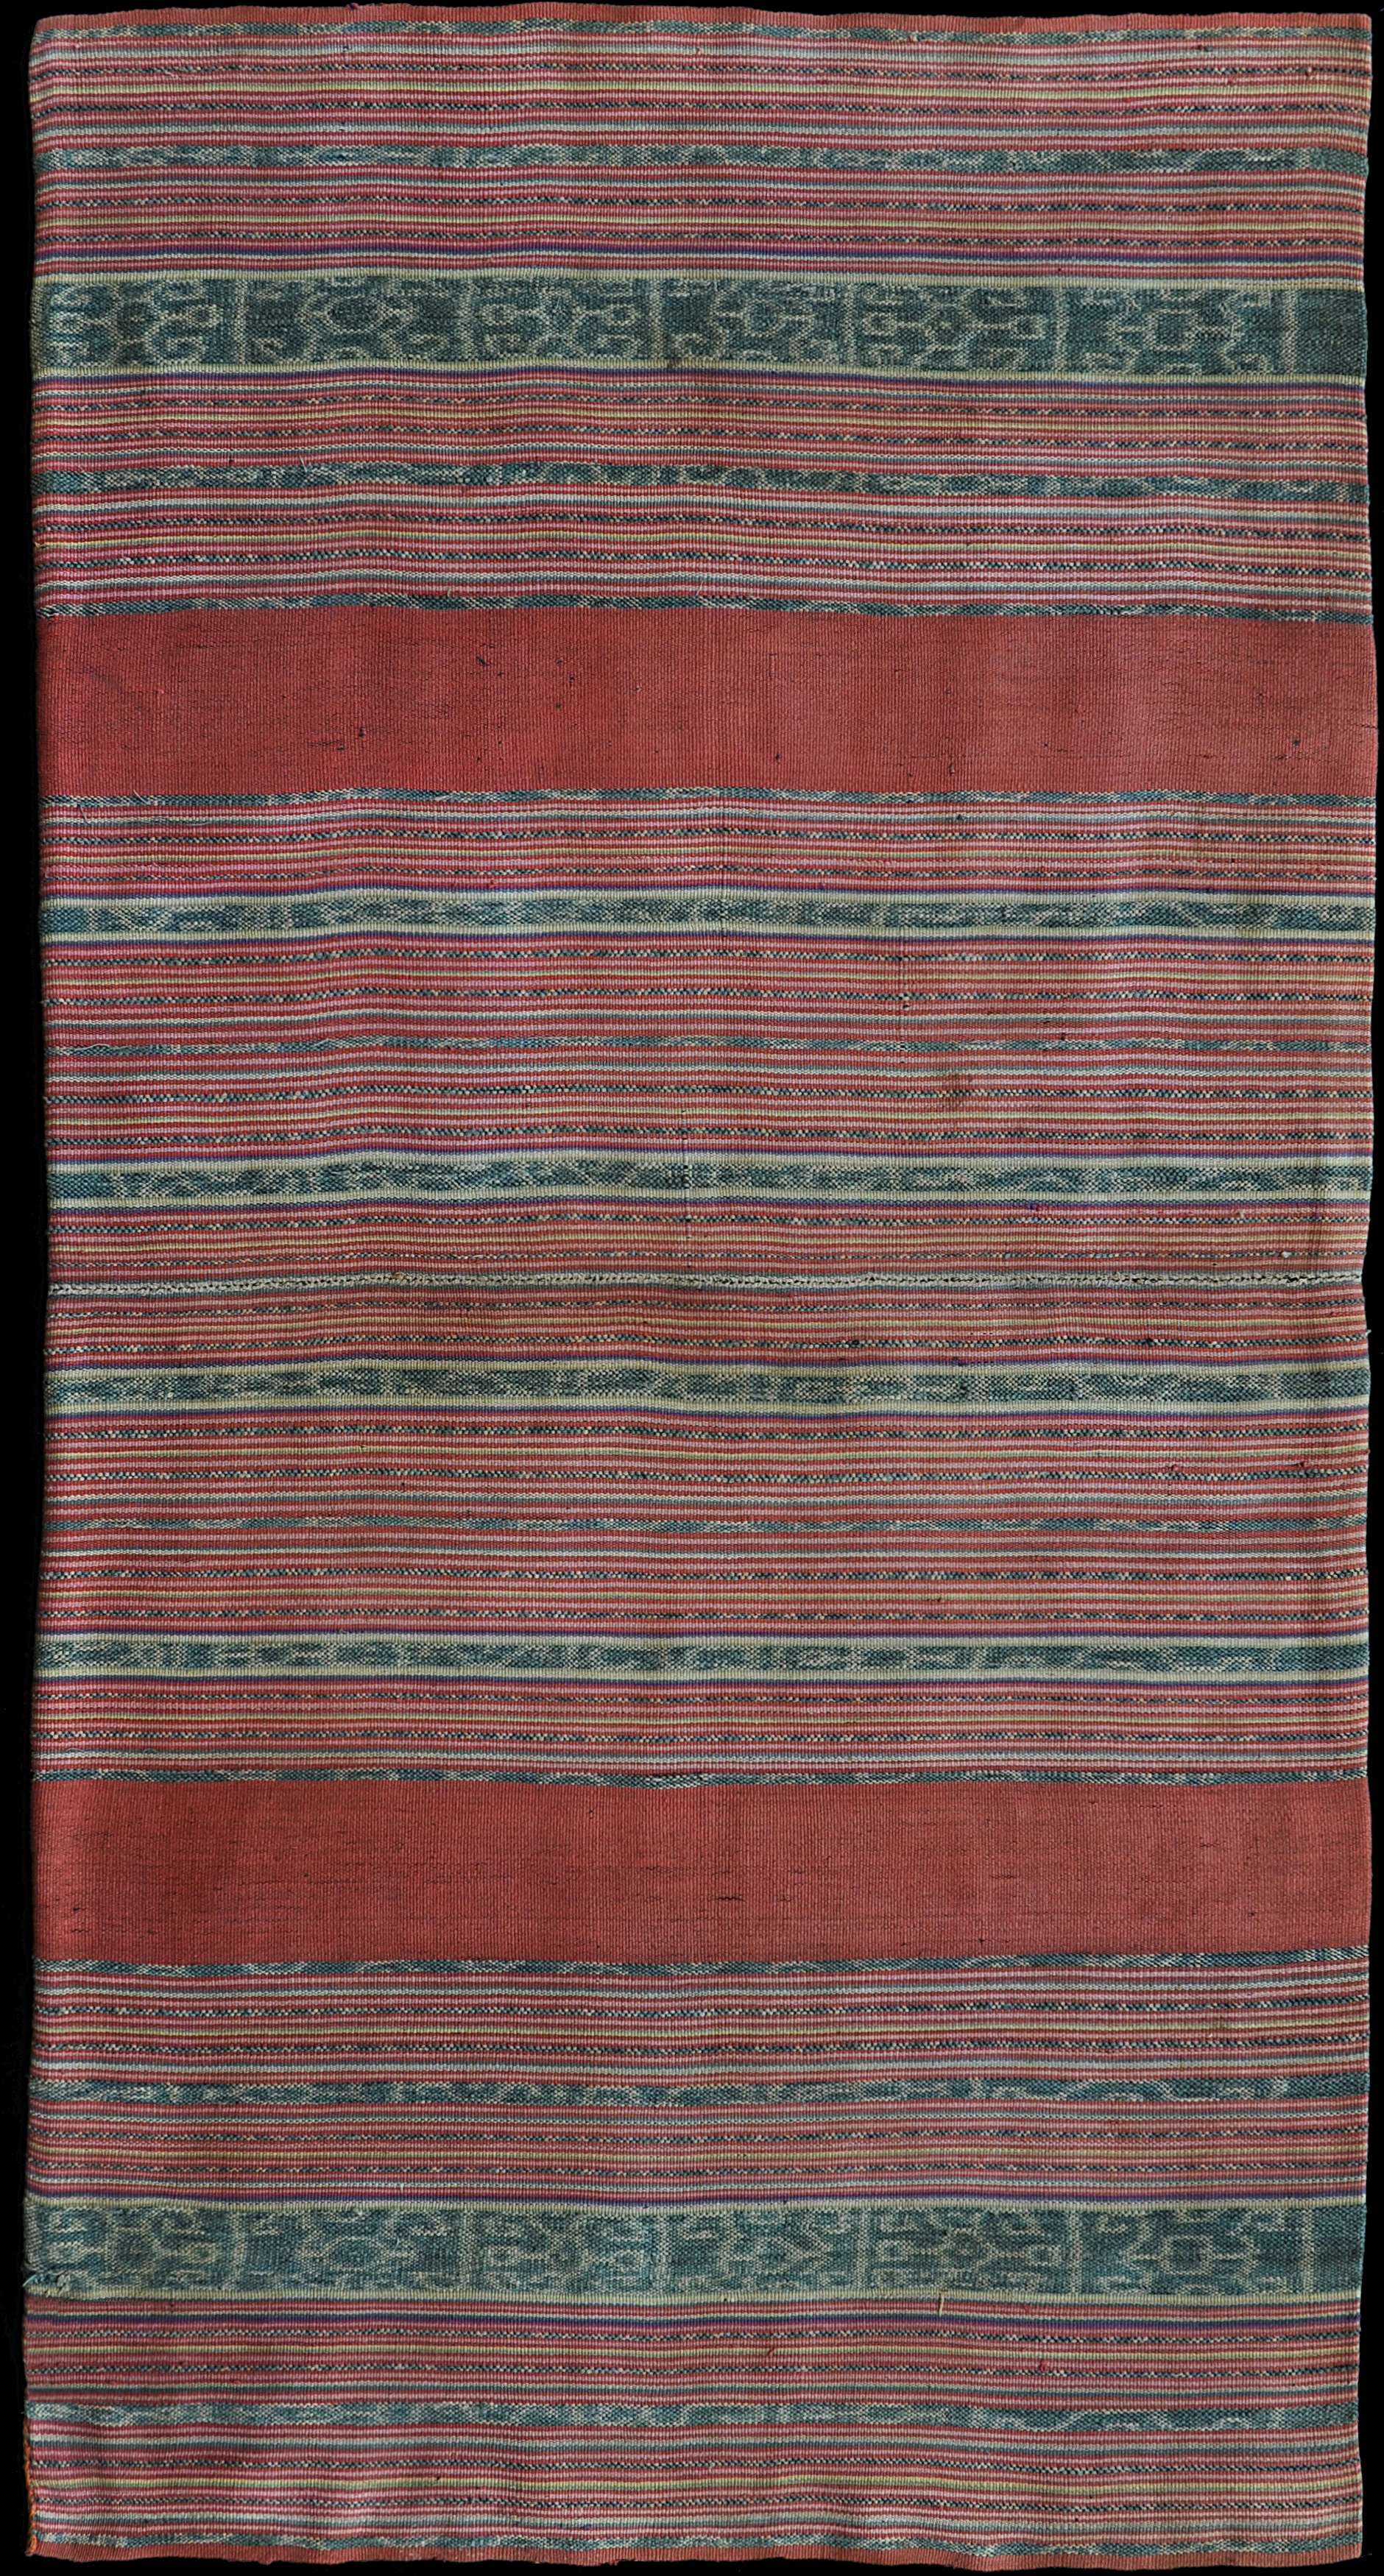 Ikat from Leti, Moluccas, Indonesia